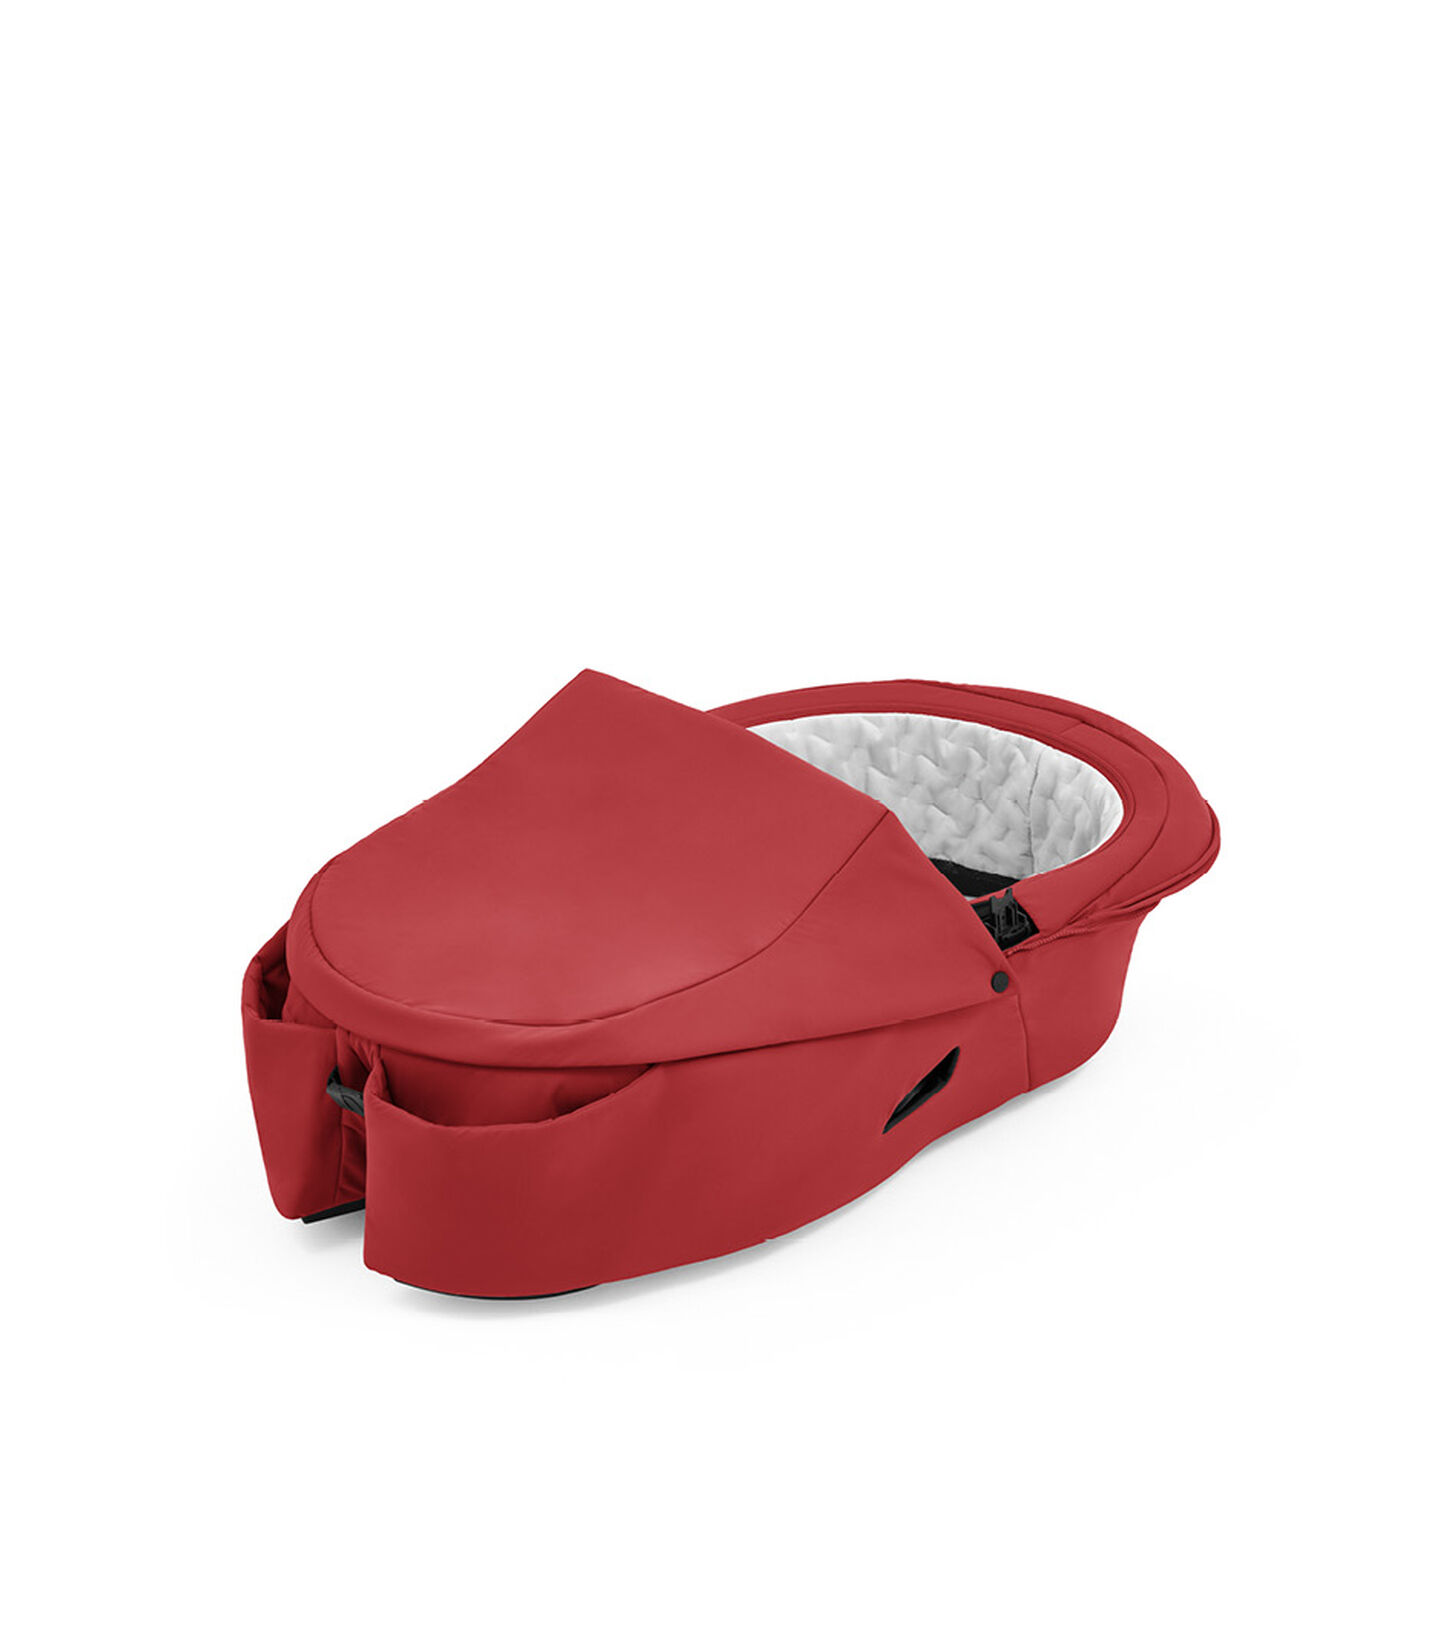 Stokke® Xplory® X Ruby Red Carry Cot, no canopy. view 1